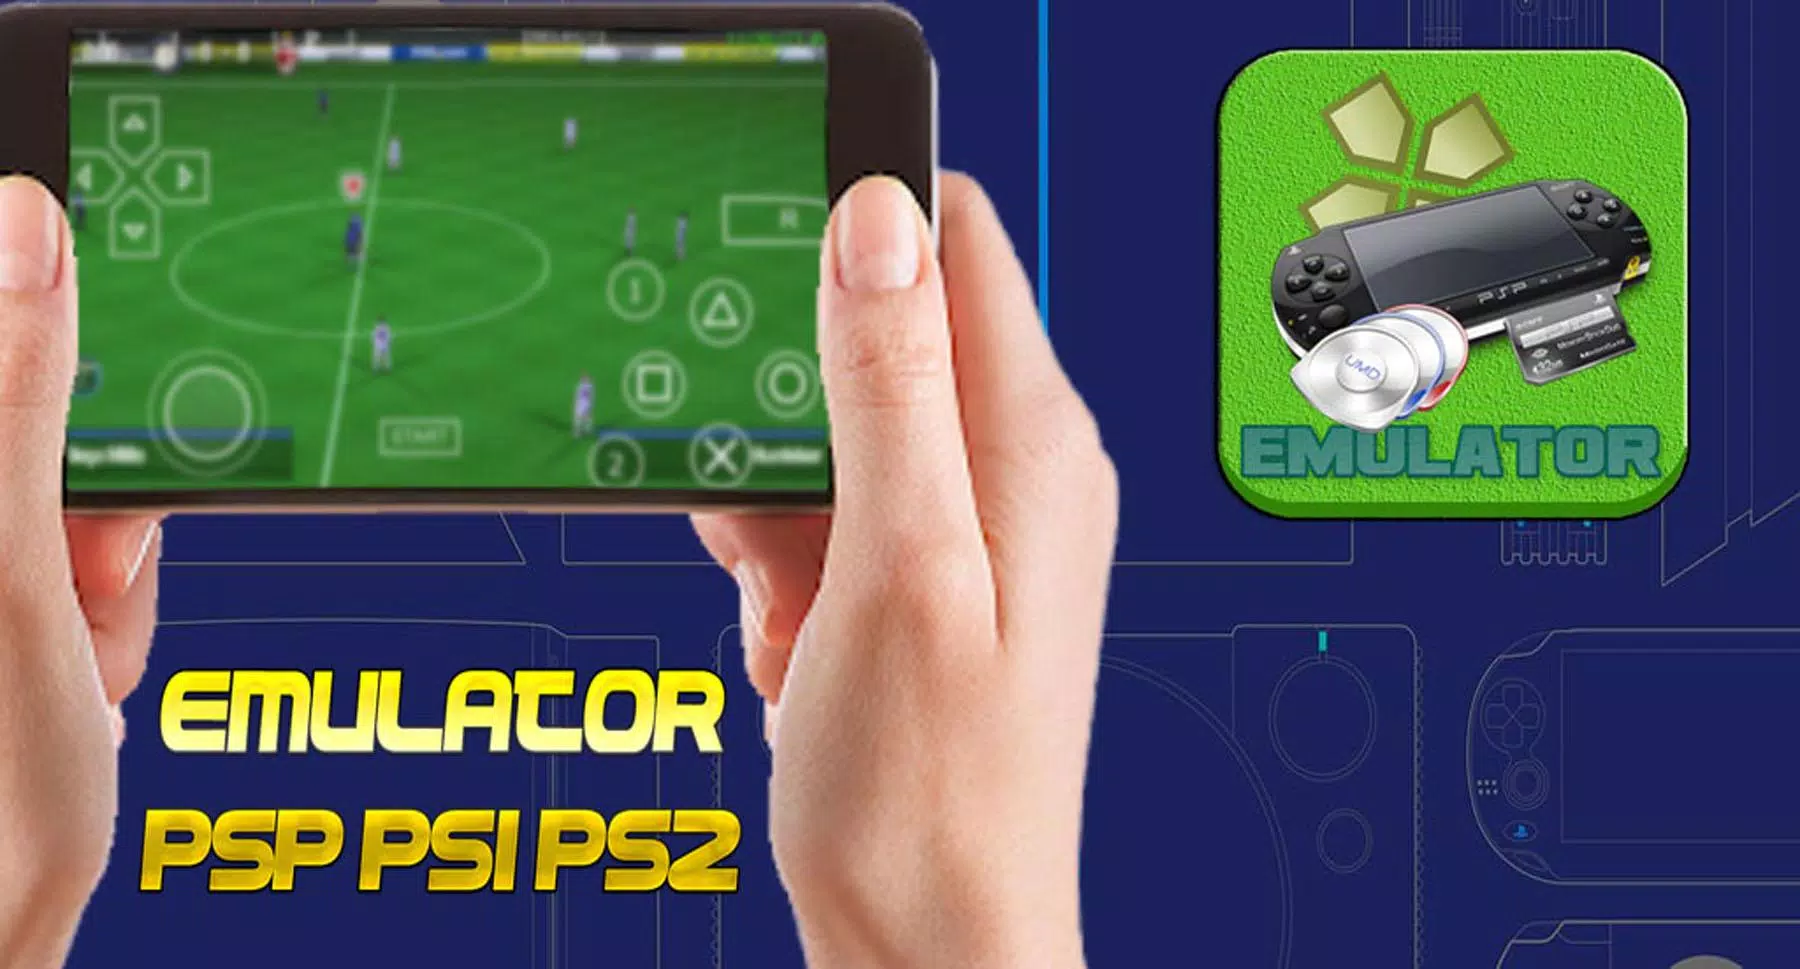 Emulator PSP PS1 PS2 for Android - APK Download